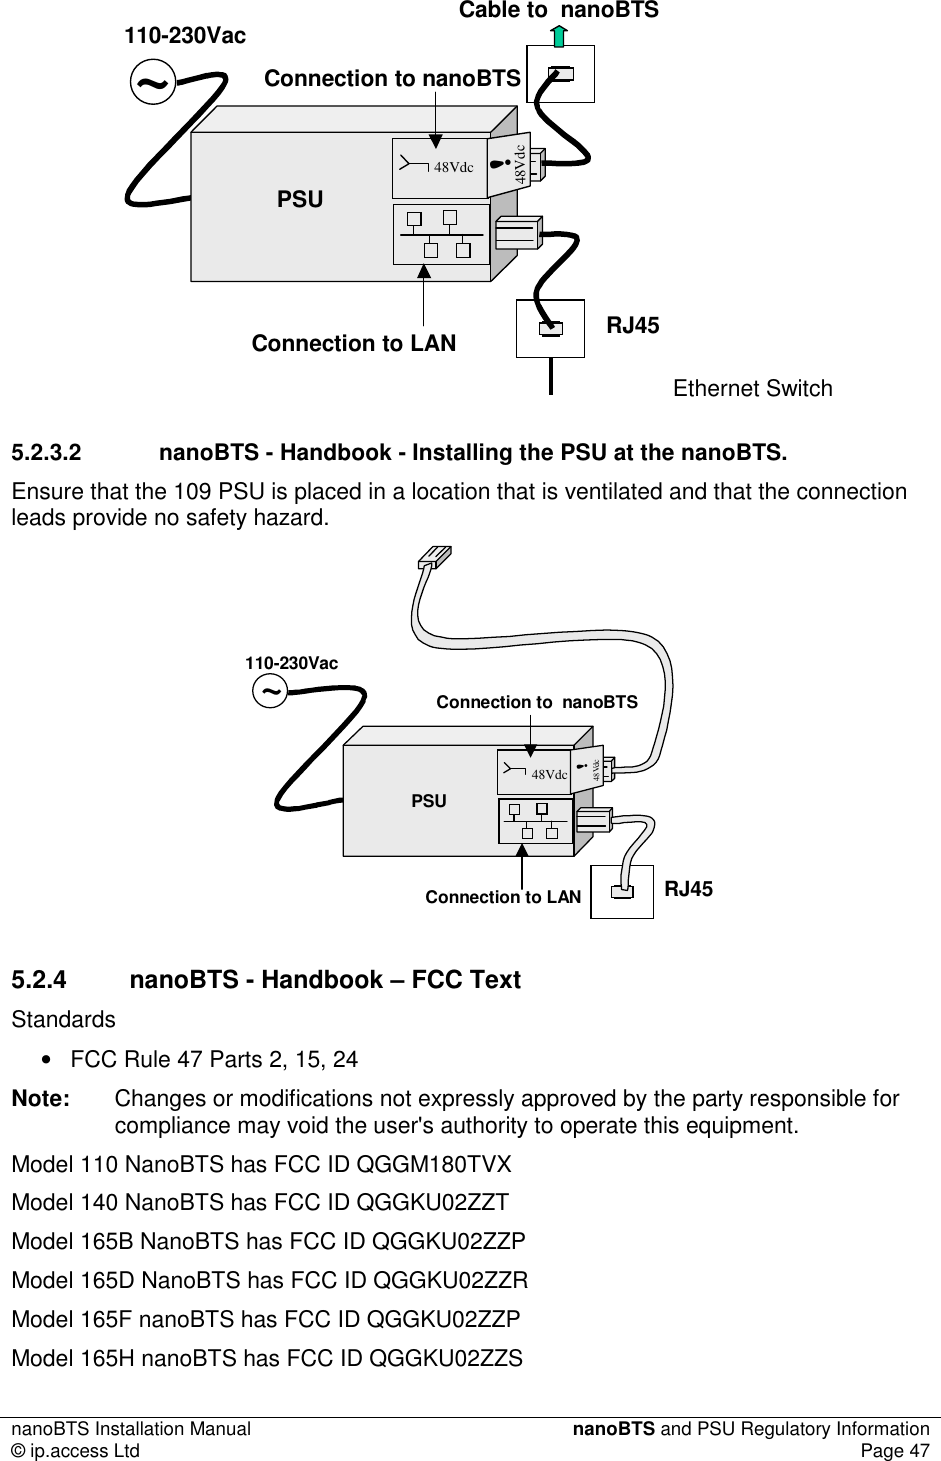 nanoBTS Installation Manual  nanoBTS and PSU Regulatory Information © ip.access Ltd  Page 47  ~PSU48Vdc48Vdc!110-230VacRJ45Connection to LANConnection to nanoBTSCable to  nanoBTSEthernet Switch 5.2.3.2  nanoBTS - Handbook - Installing the PSU at the nanoBTS. Ensure that the 109 PSU is placed in a location that is ventilated and that the connection leads provide no safety hazard. RJ45Connection to LAN~PSU48Vdc48Vdc!110-230VacConnection to  nanoBTS 5.2.4  nanoBTS - Handbook – FCC Text Standards •  FCC Rule 47 Parts 2, 15, 24 Note:  Changes or modifications not expressly approved by the party responsible for compliance may void the user&apos;s authority to operate this equipment. Model 110 NanoBTS has FCC ID QGGM180TVX Model 140 NanoBTS has FCC ID QGGKU02ZZT Model 165B NanoBTS has FCC ID QGGKU02ZZP Model 165D NanoBTS has FCC ID QGGKU02ZZR Model 165F nanoBTS has FCC ID QGGKU02ZZP Model 165H nanoBTS has FCC ID QGGKU02ZZS 